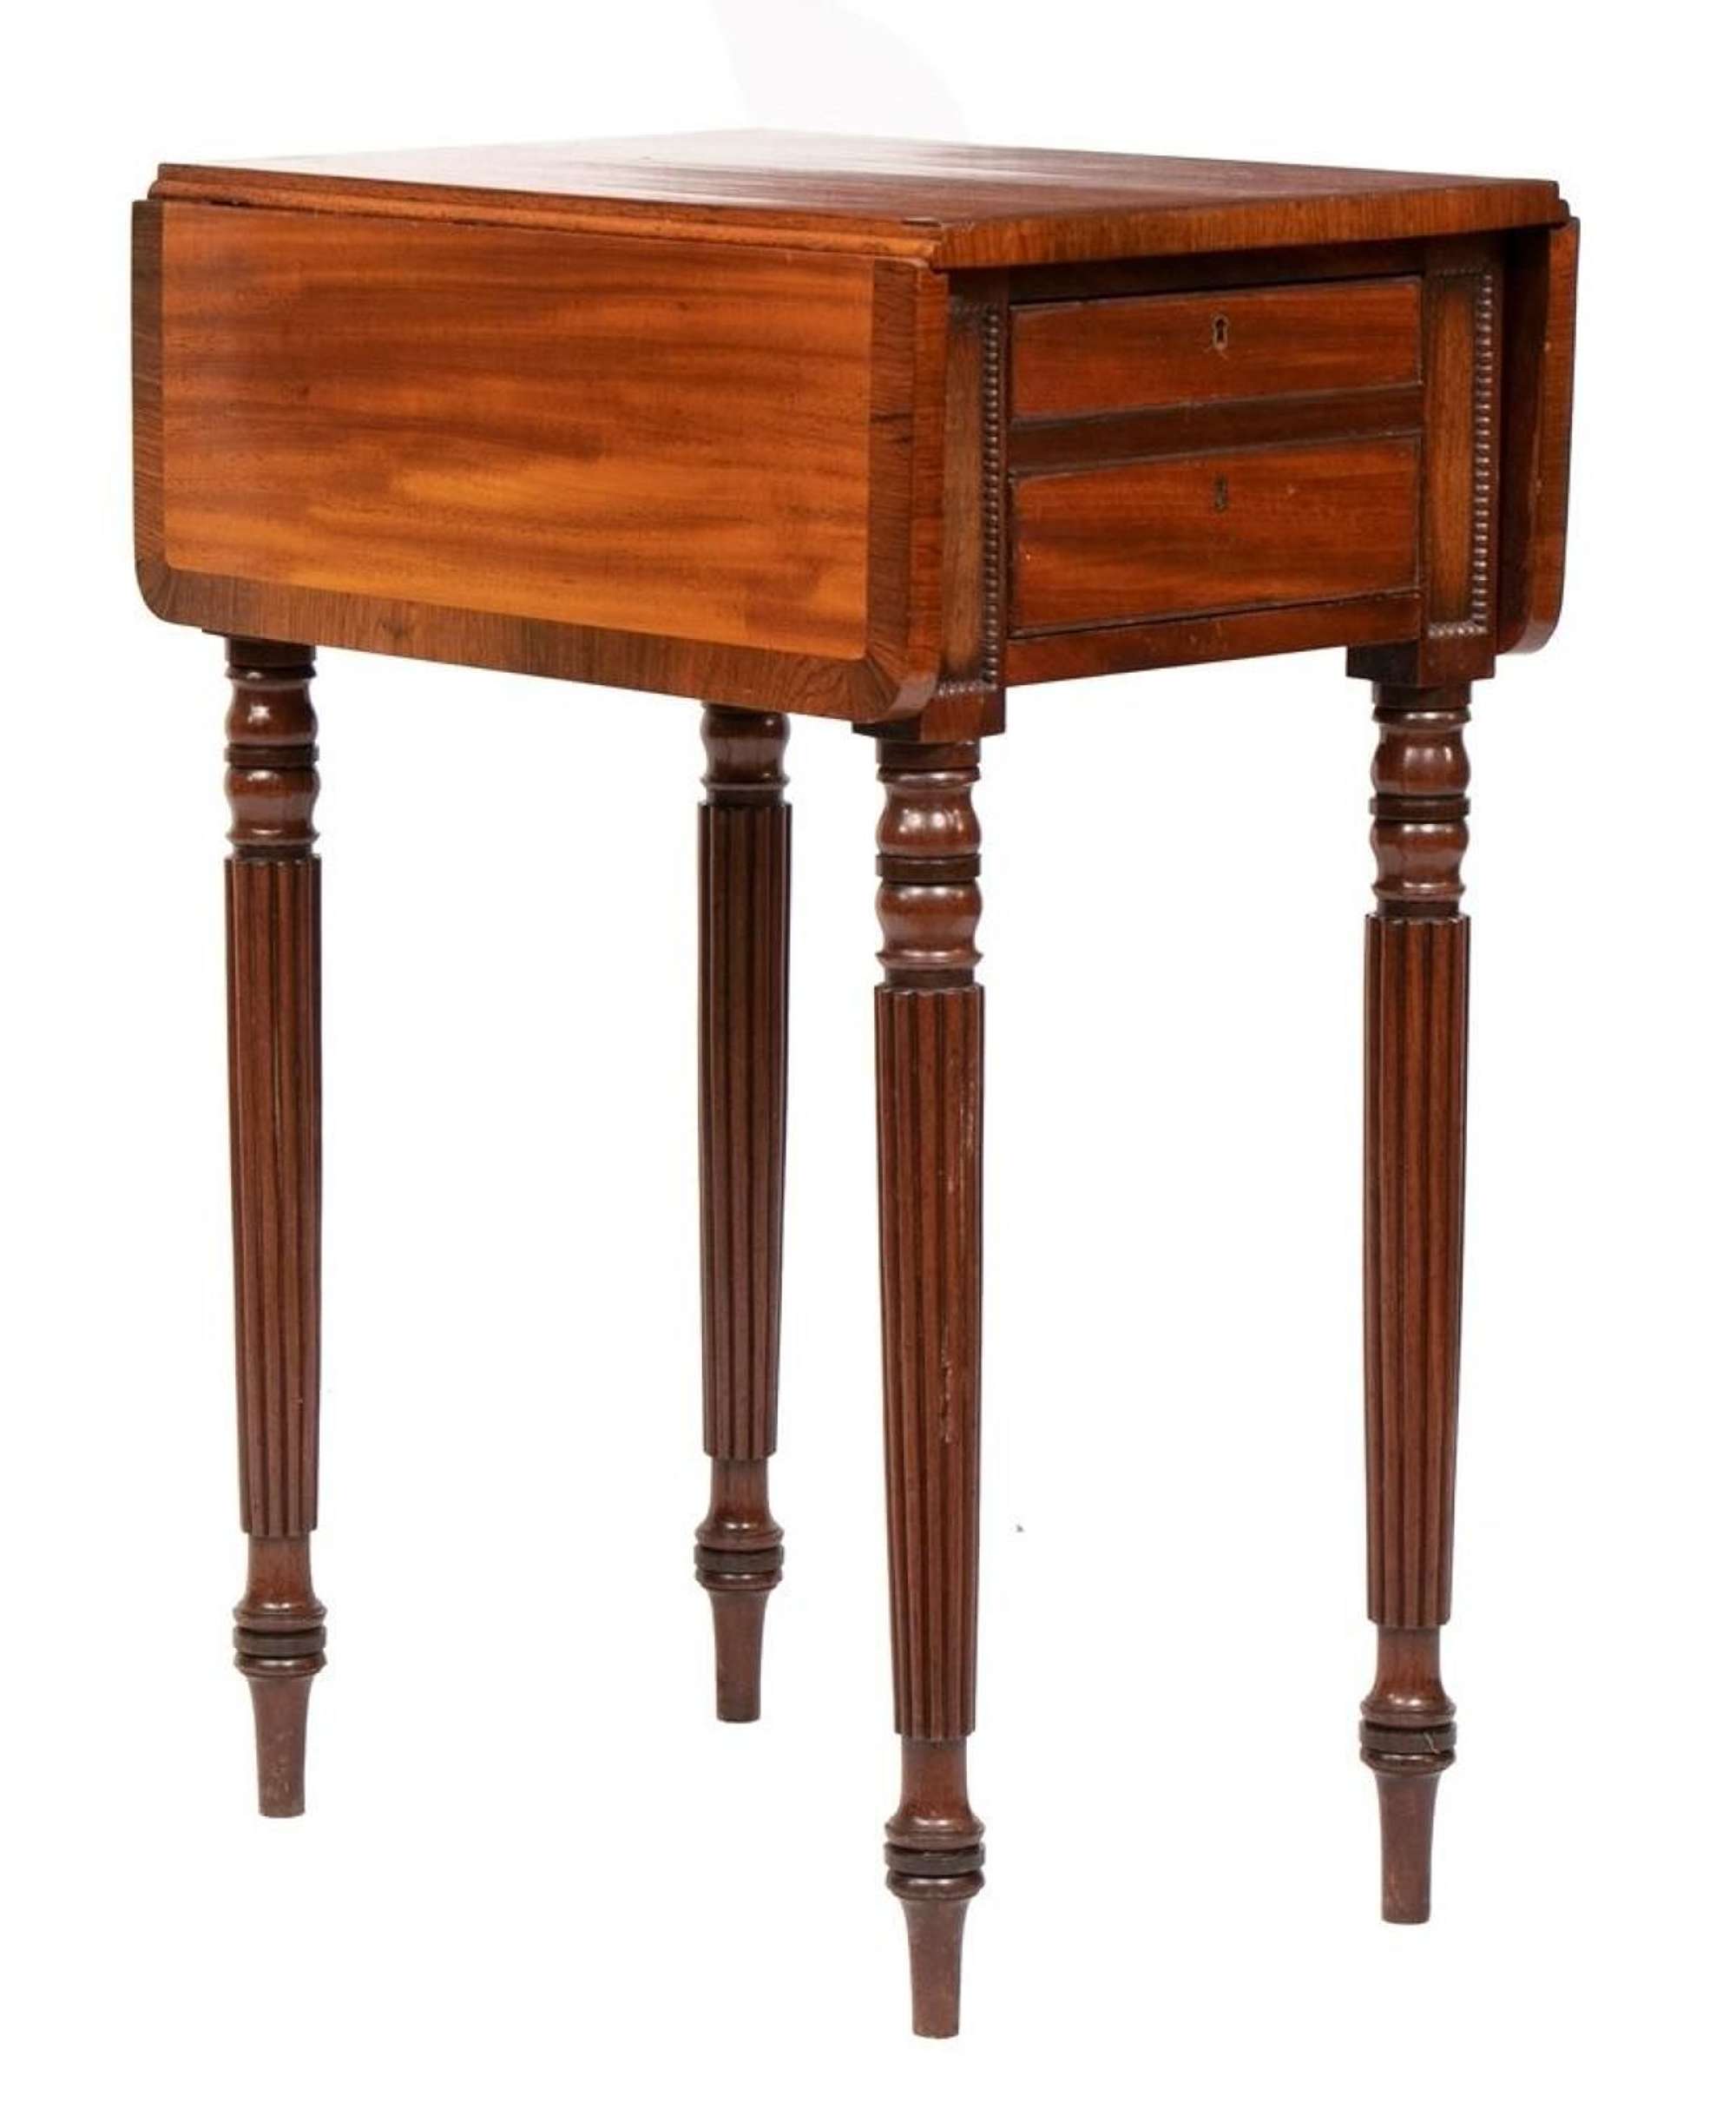 Antique Mahogany & Rosewood Gillows Side Table c.1820